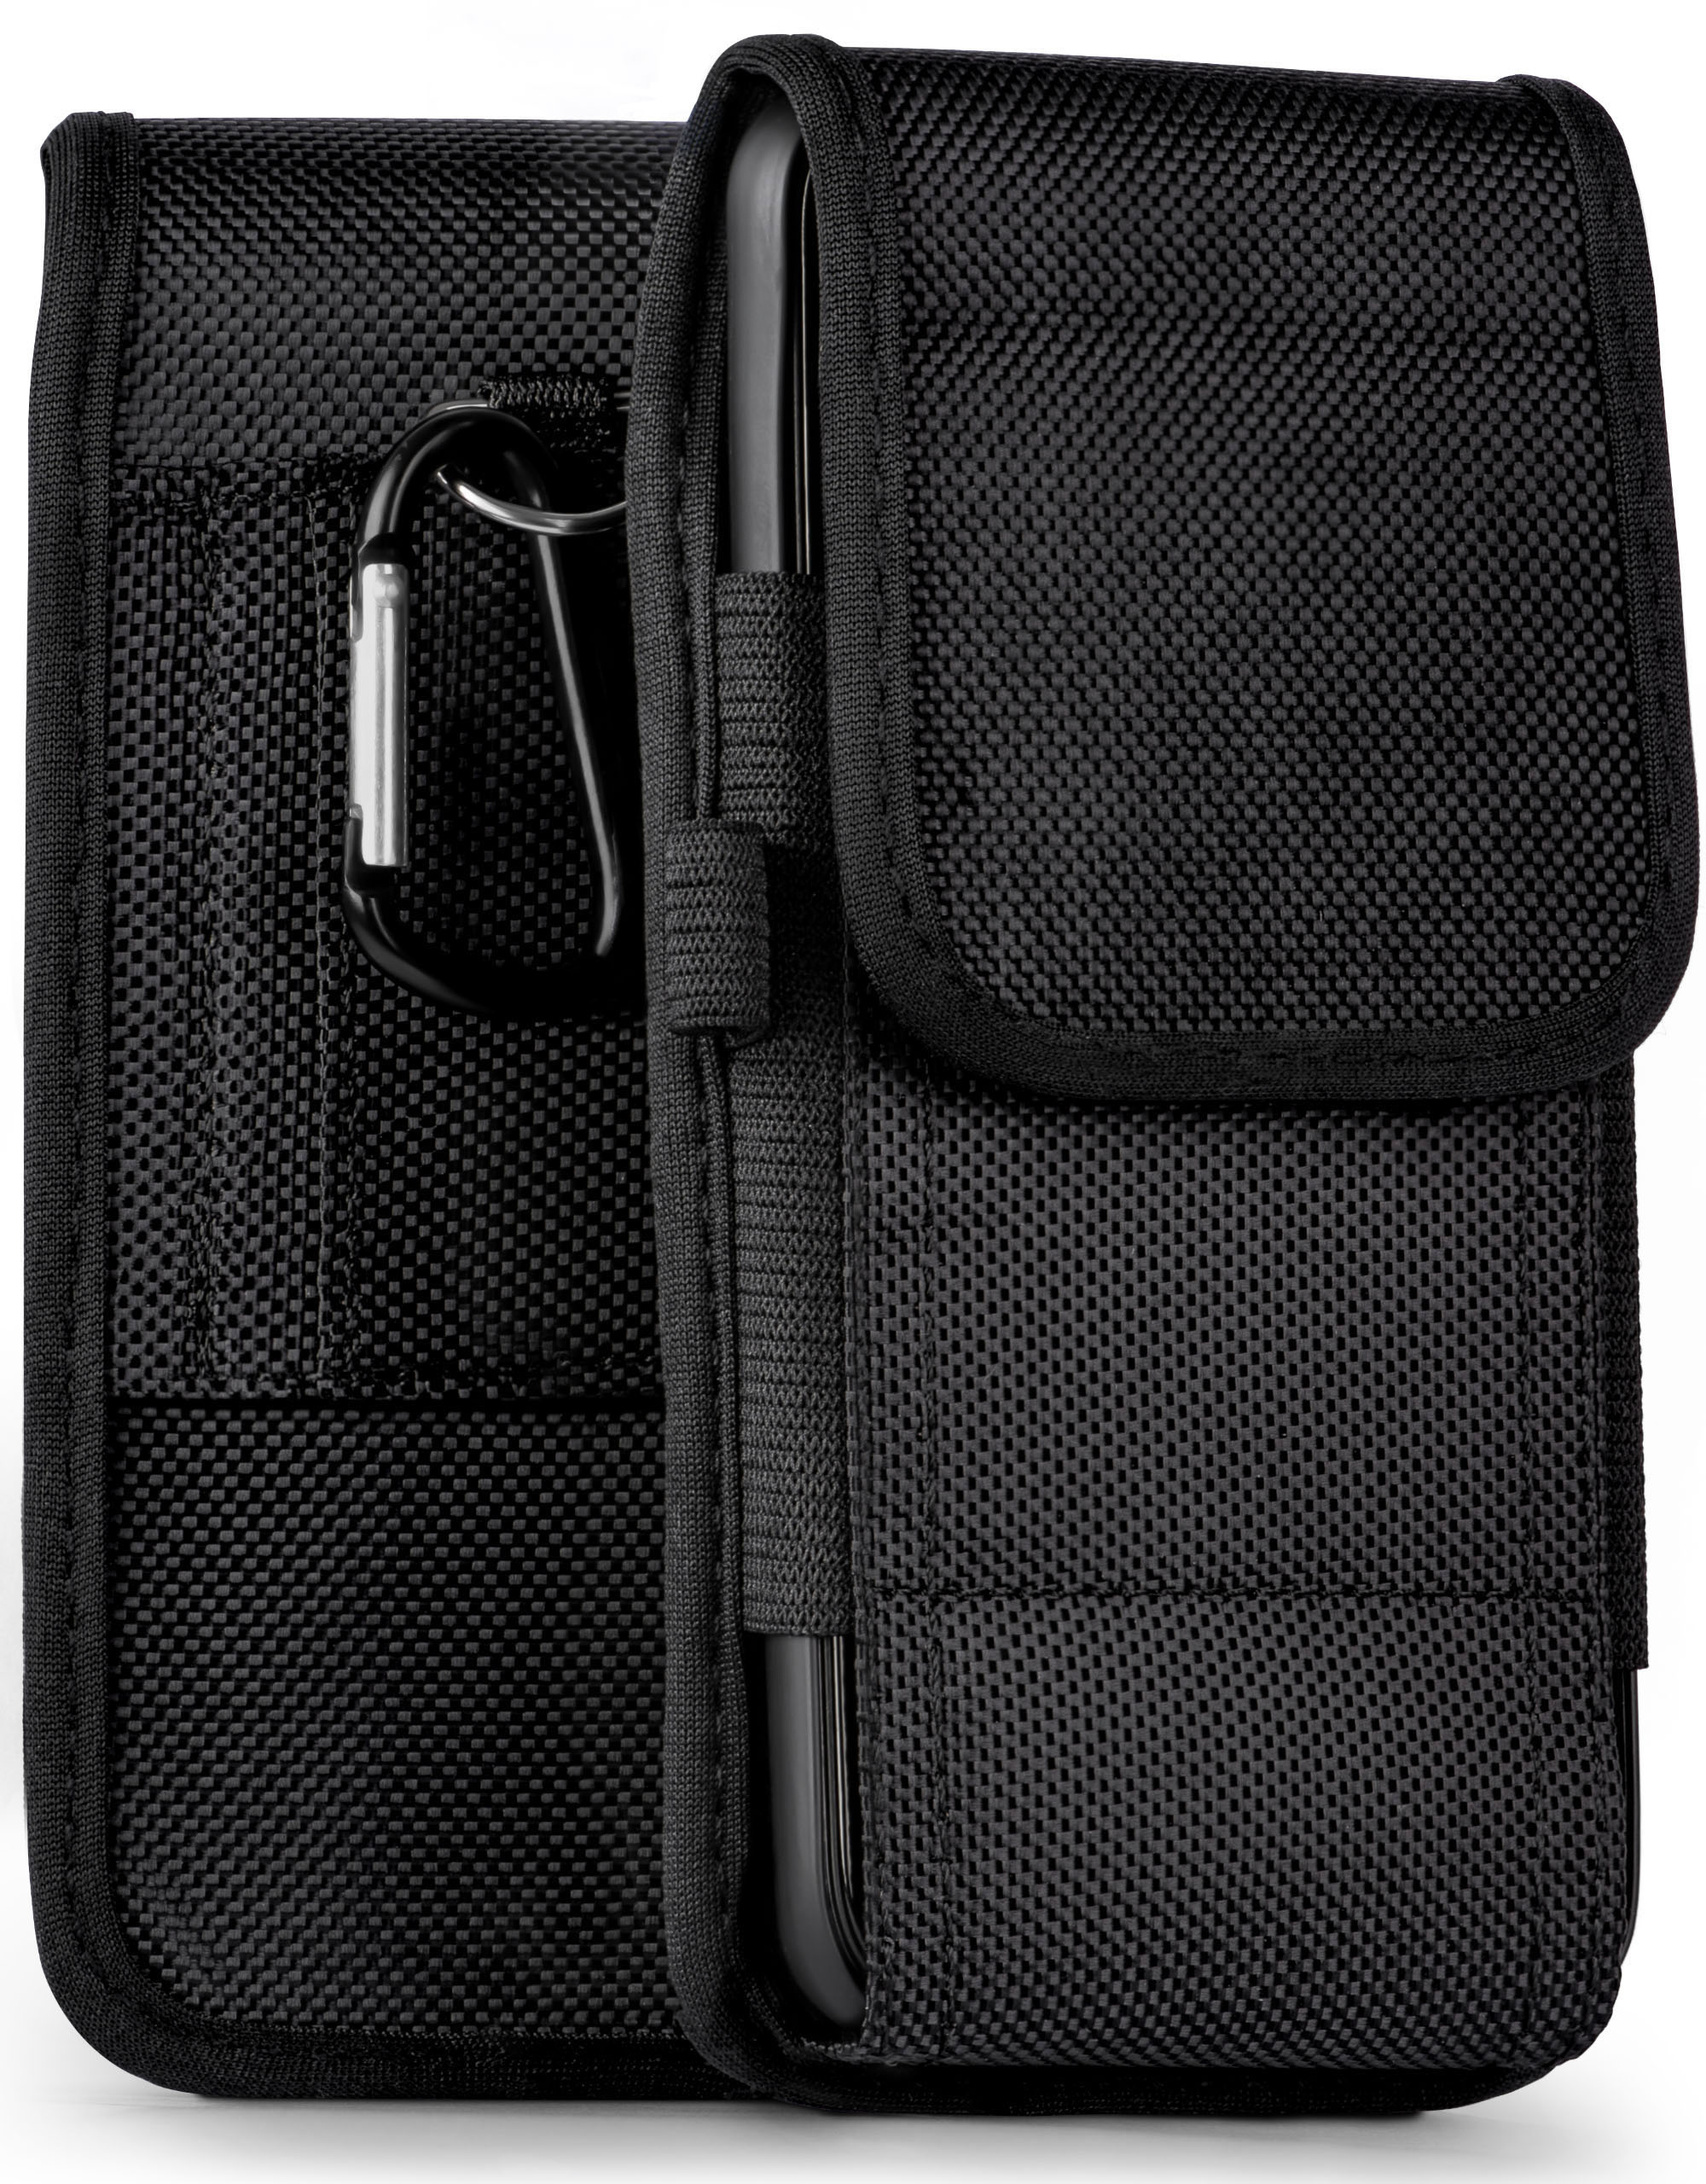 Case, Trail Cubot, MOEX Agility R19, Holster,